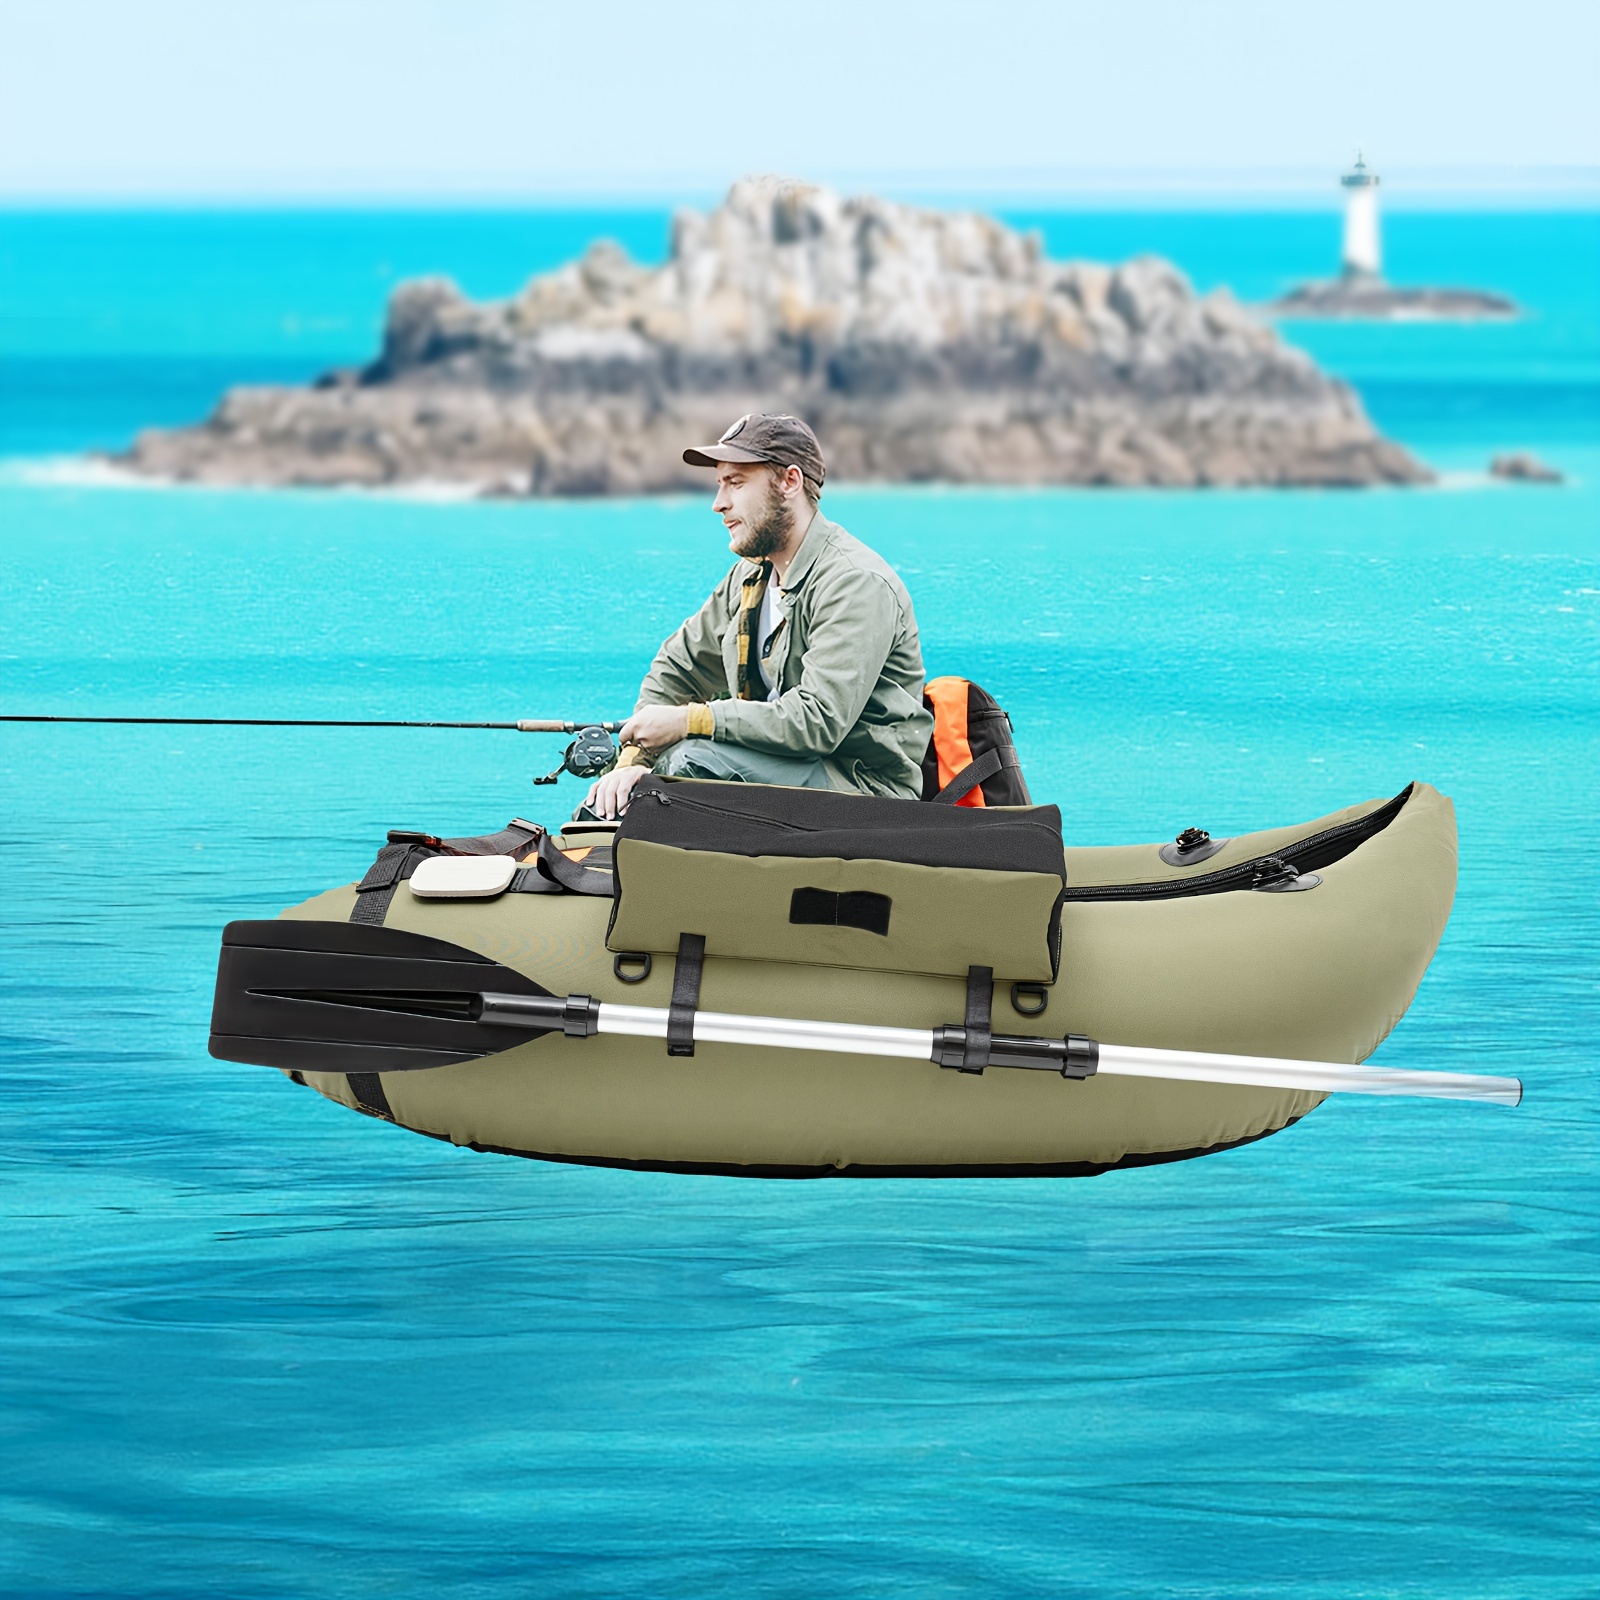 Outdoor Inflatable Portable Fishing Boat Used In Oceans Lakes Rivers And  Creeks For Rafting Exploring And Other Waters Or Activities Boat Parts  Accessories, High-quality & Affordable